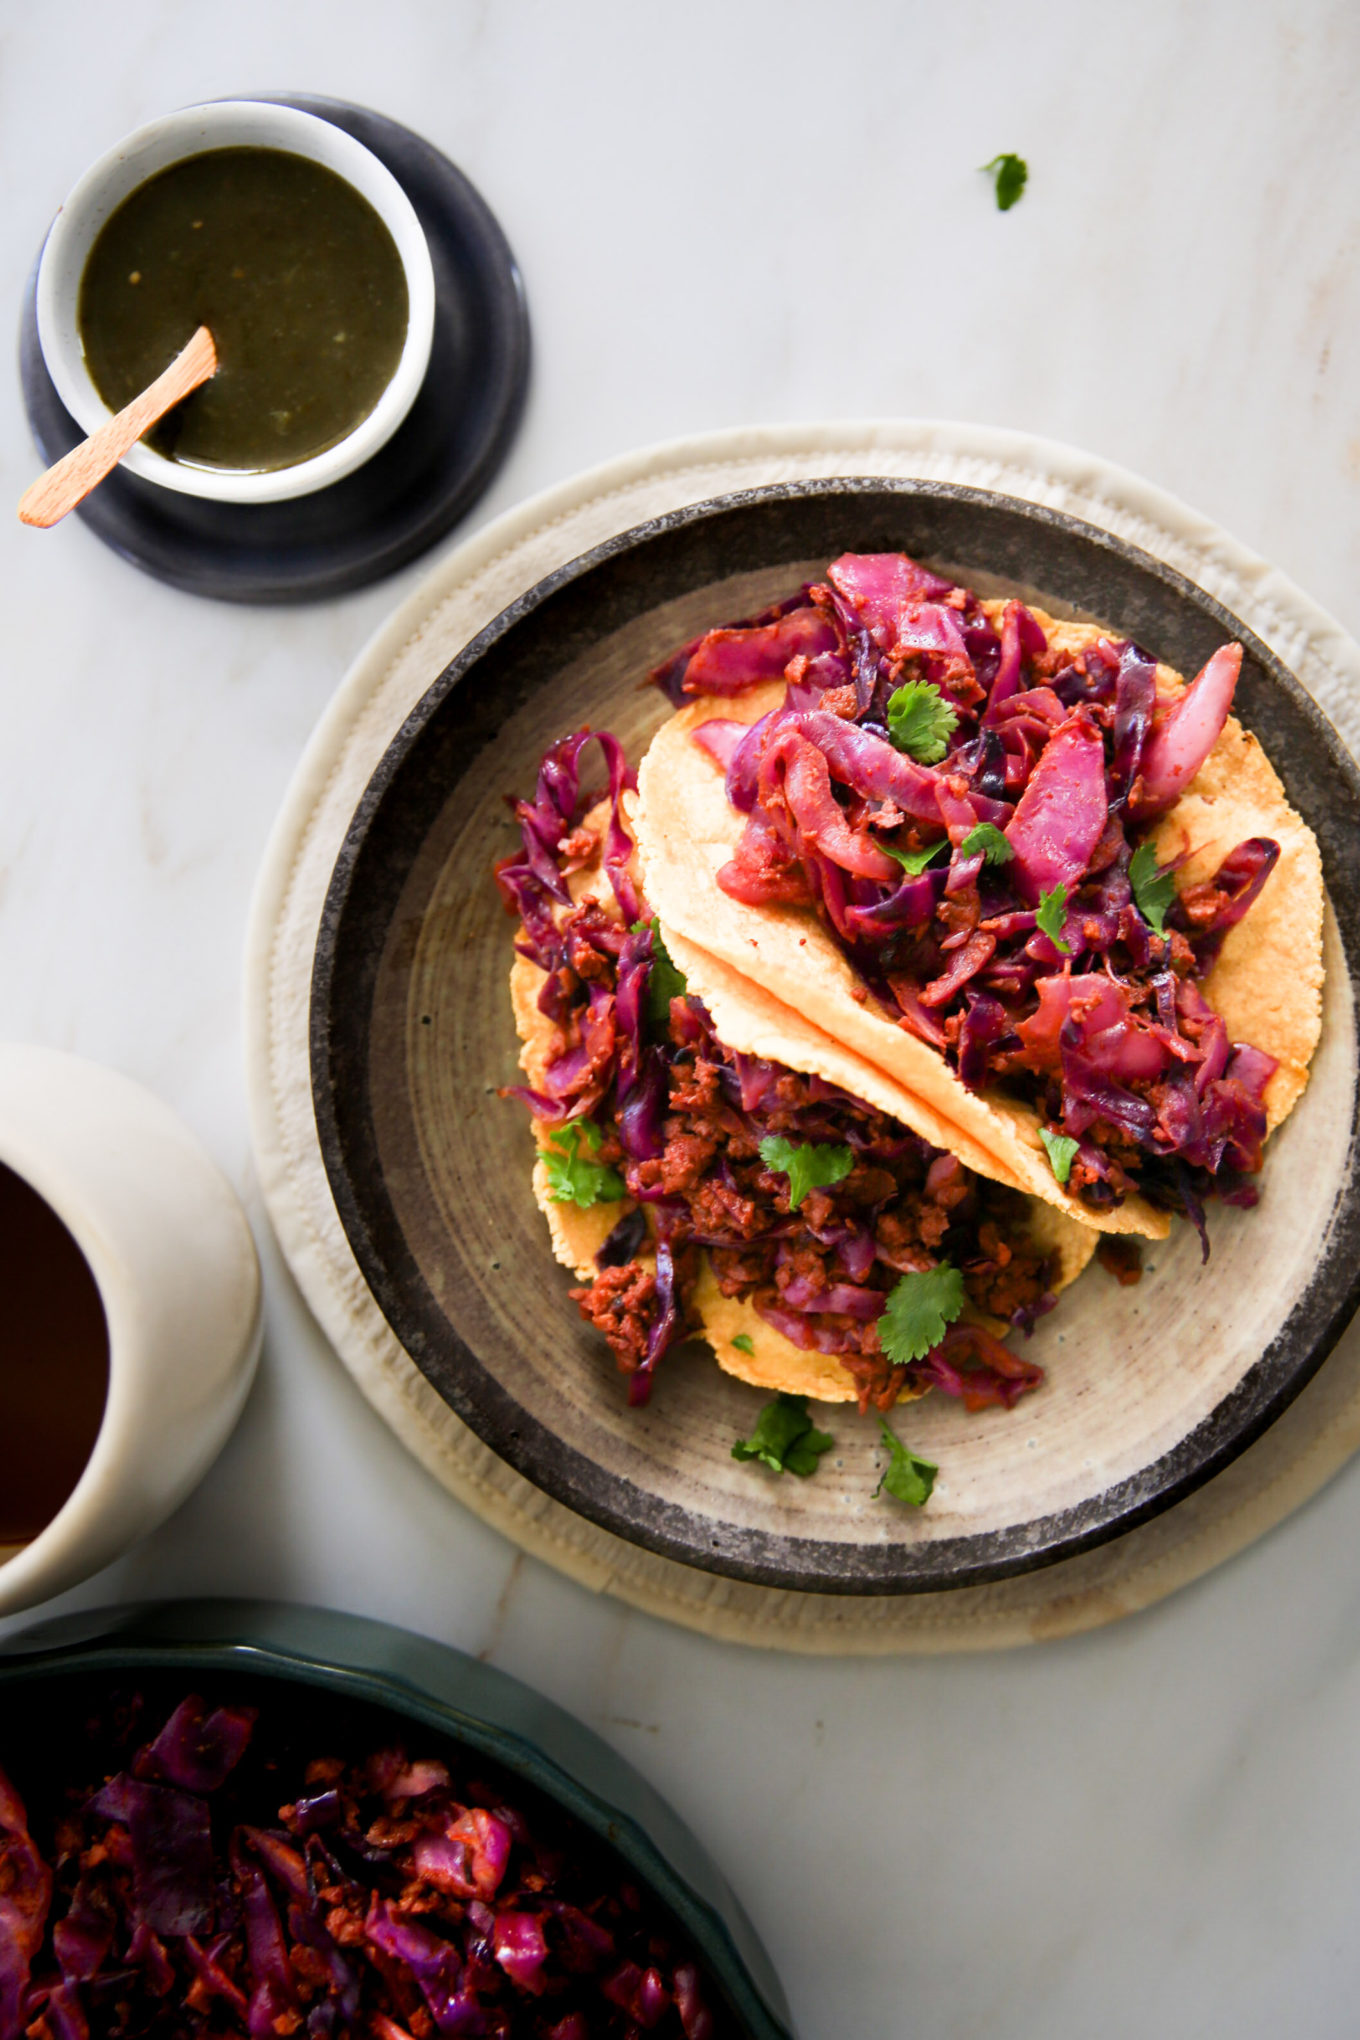 Red cabbage tacos on a plate with a cup of coffee.